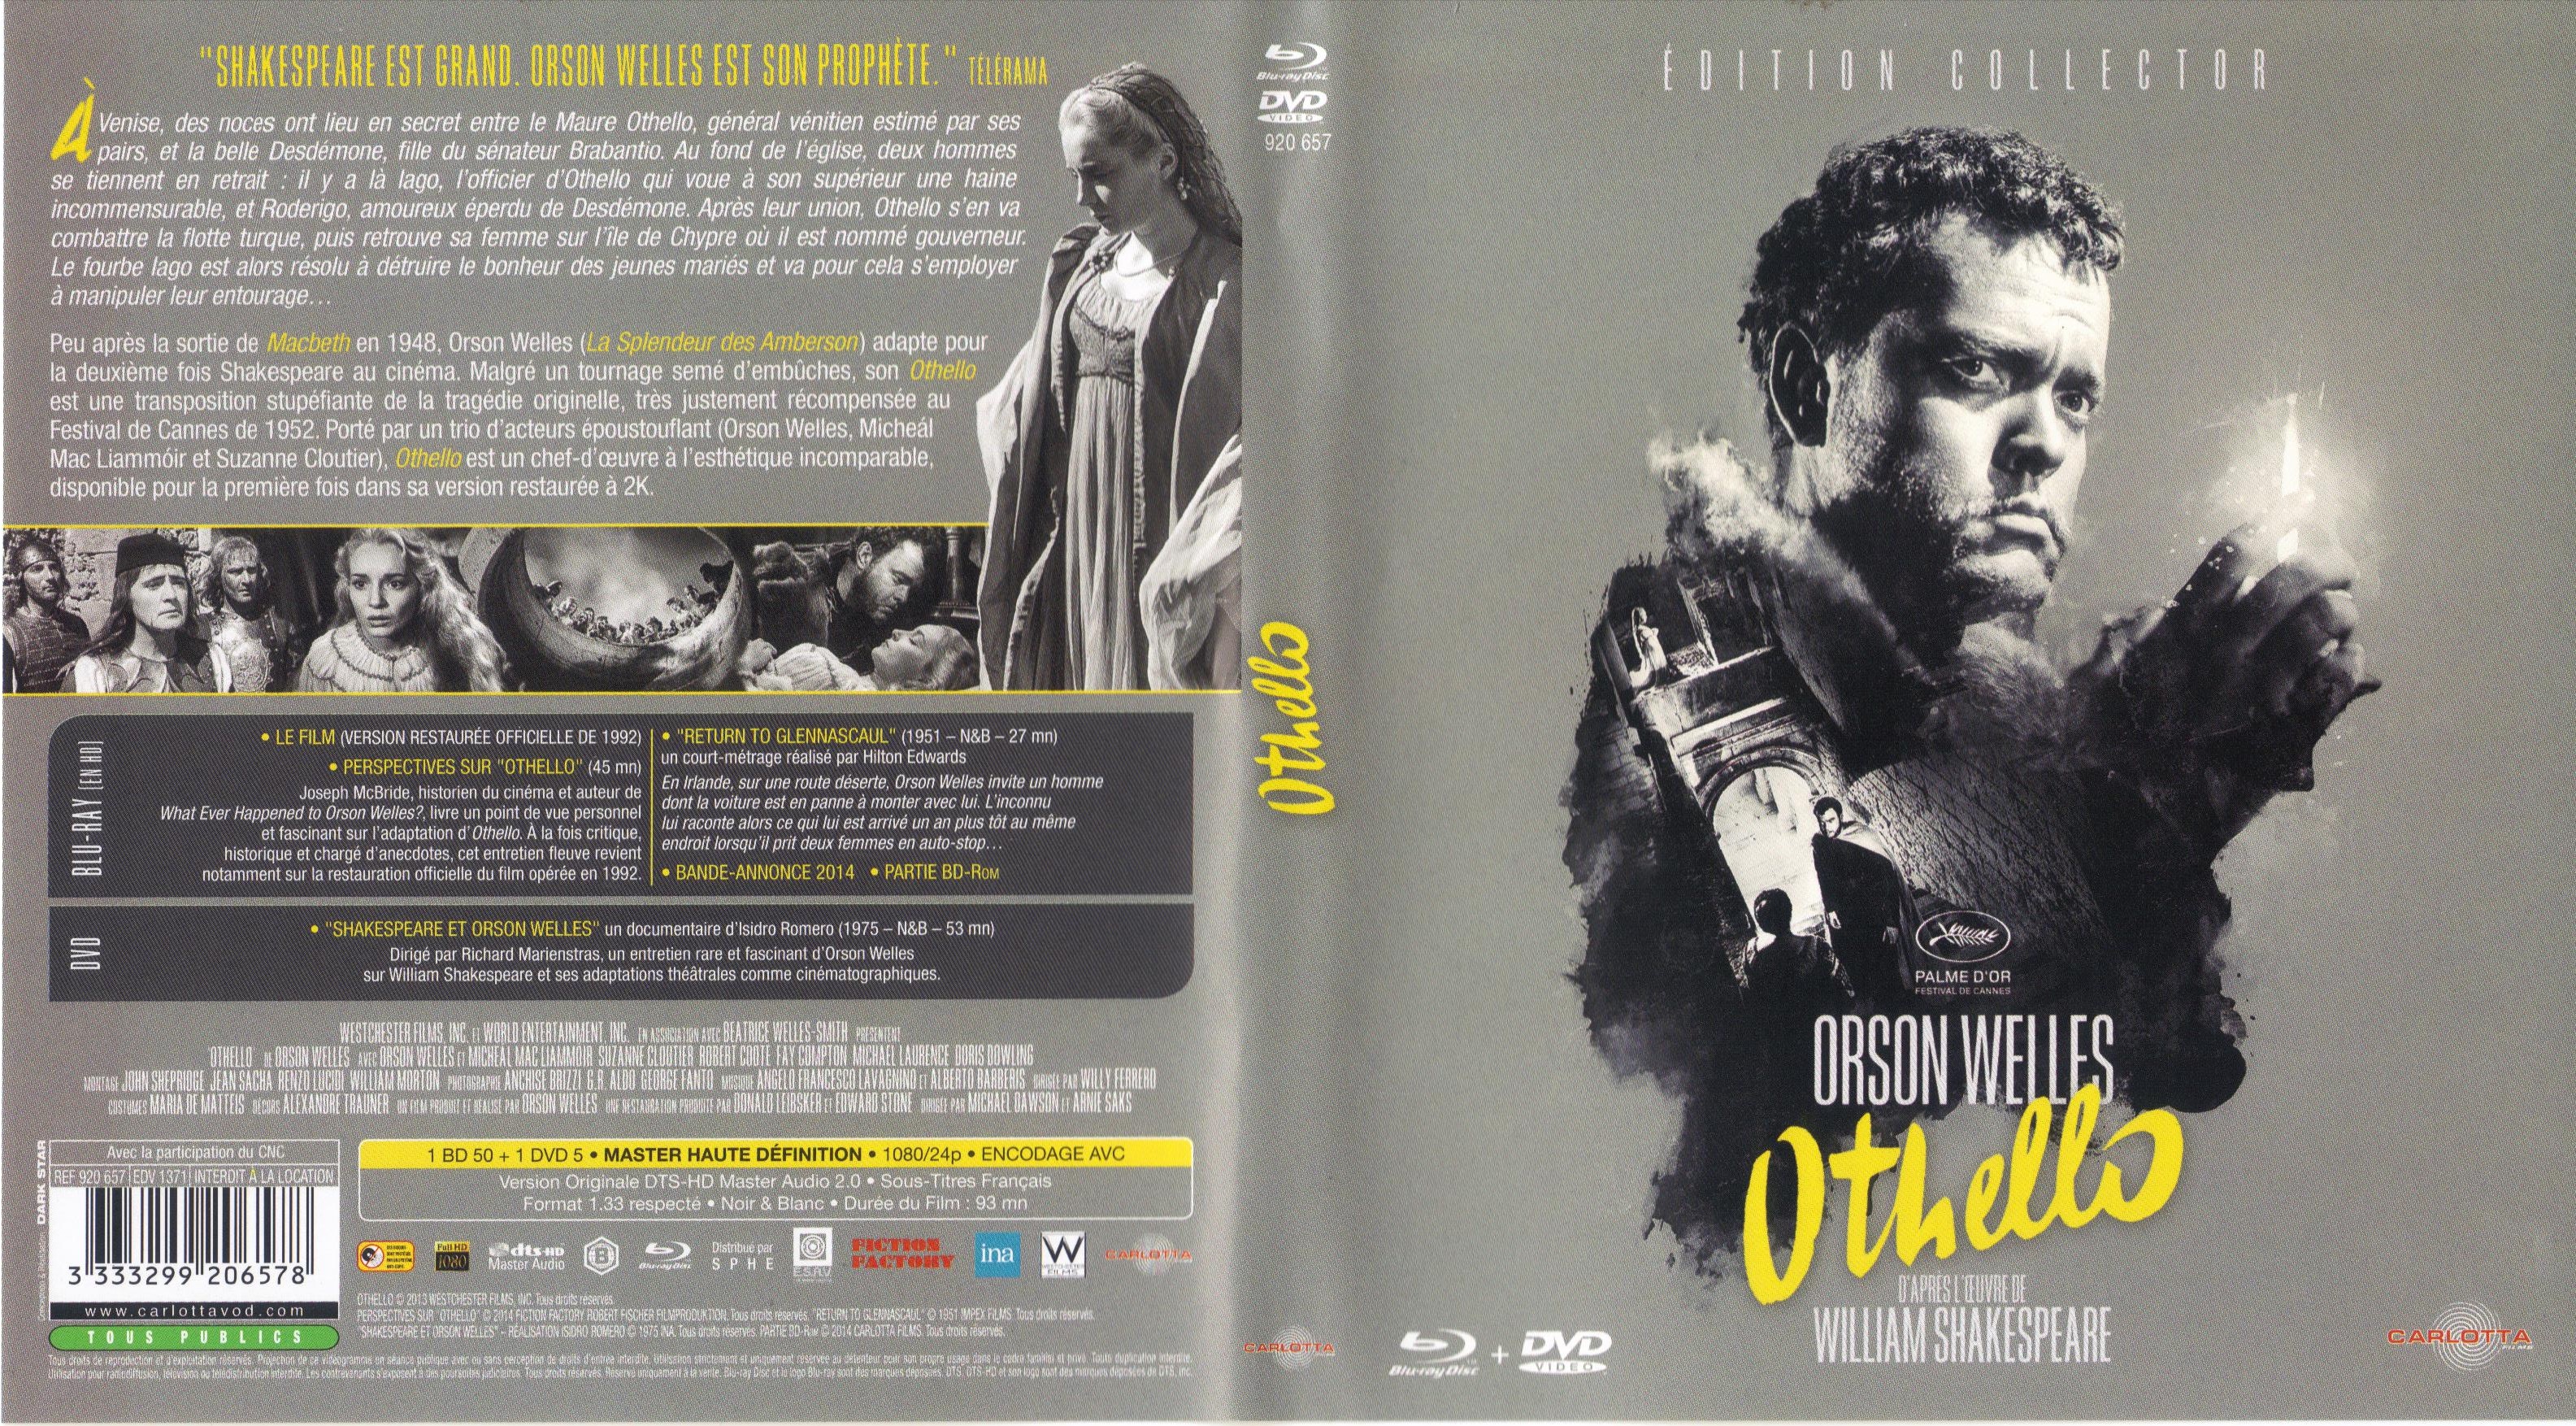 Jaquette DVD Othello (BLU-RAY)